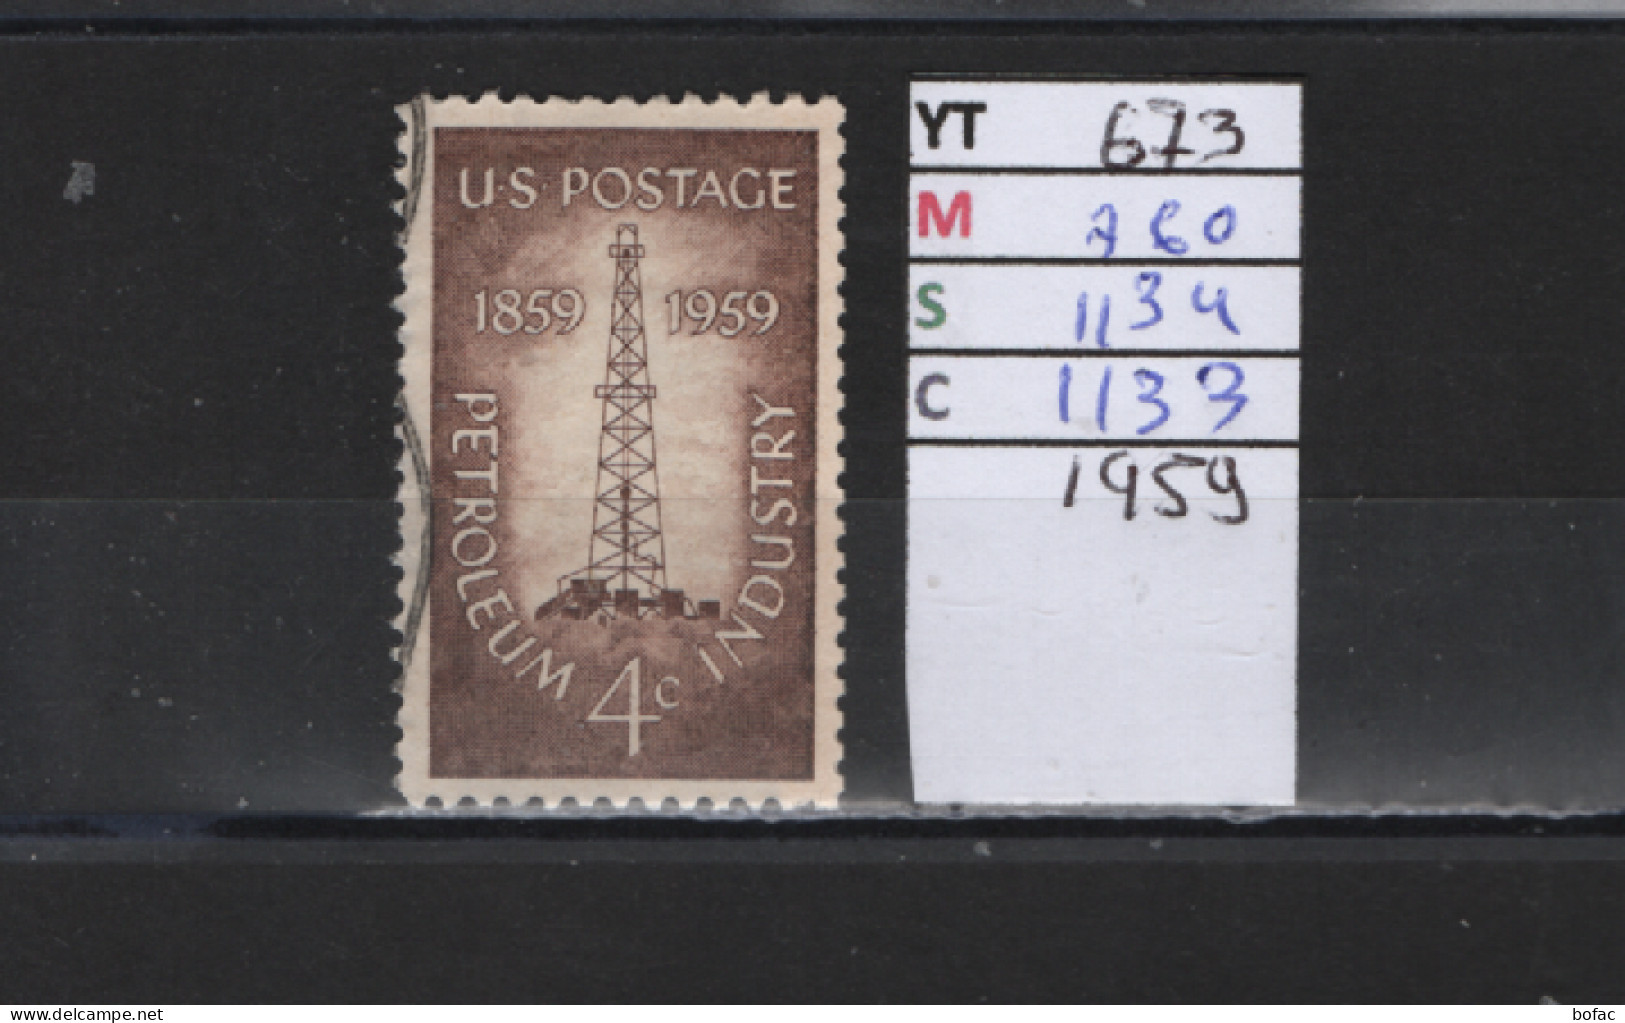 PRIX FIXE Obl  673 YT 760 MIC 113 SCO GIB Pétrole Industry Derrick 1959  58A/08 - Used Stamps